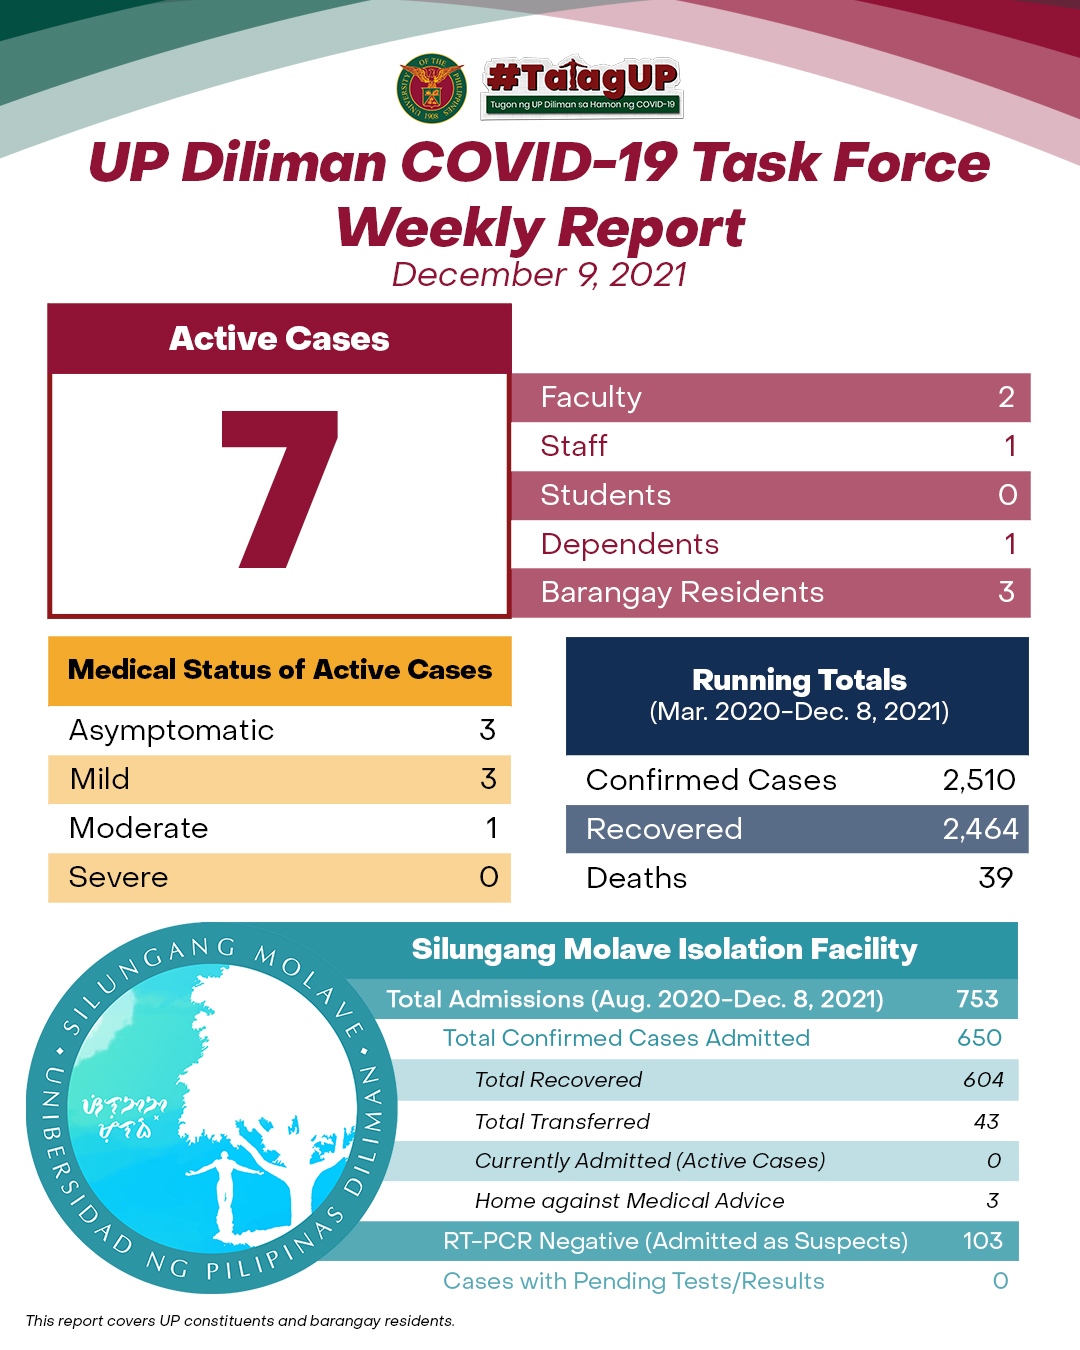 UP Diliman COVID-19 Task Force Weekly Report (November 25, 2021)